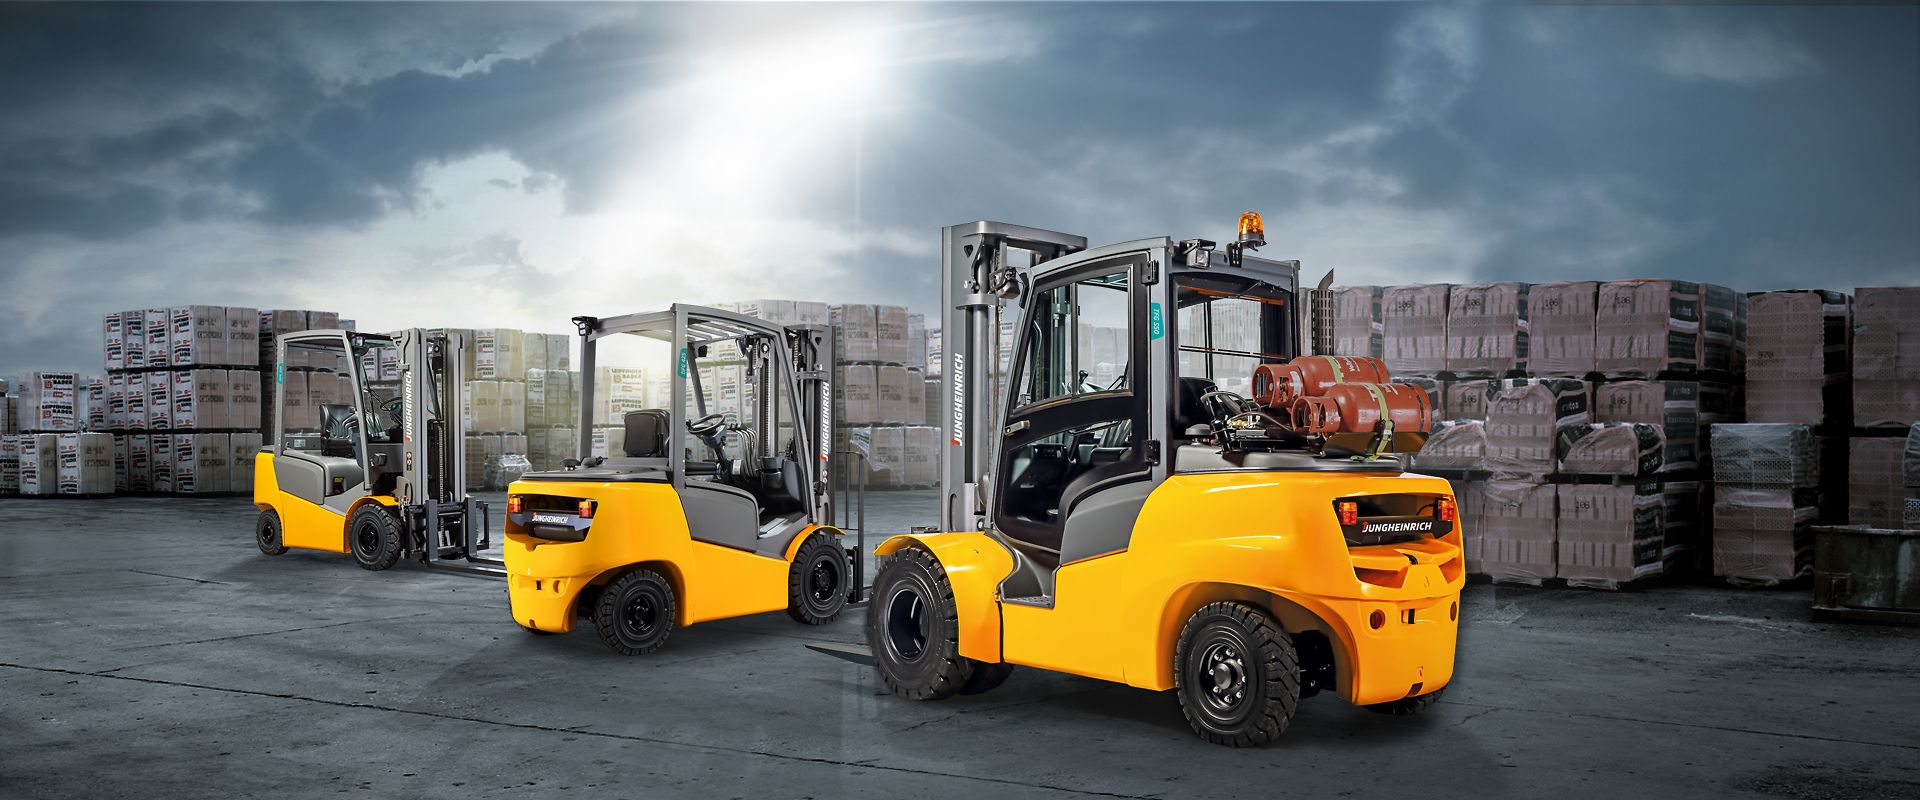 Global Forklift Trucks Market Share, Size, Growth, Opportunity, Key Players and Industry Trends 2022-27